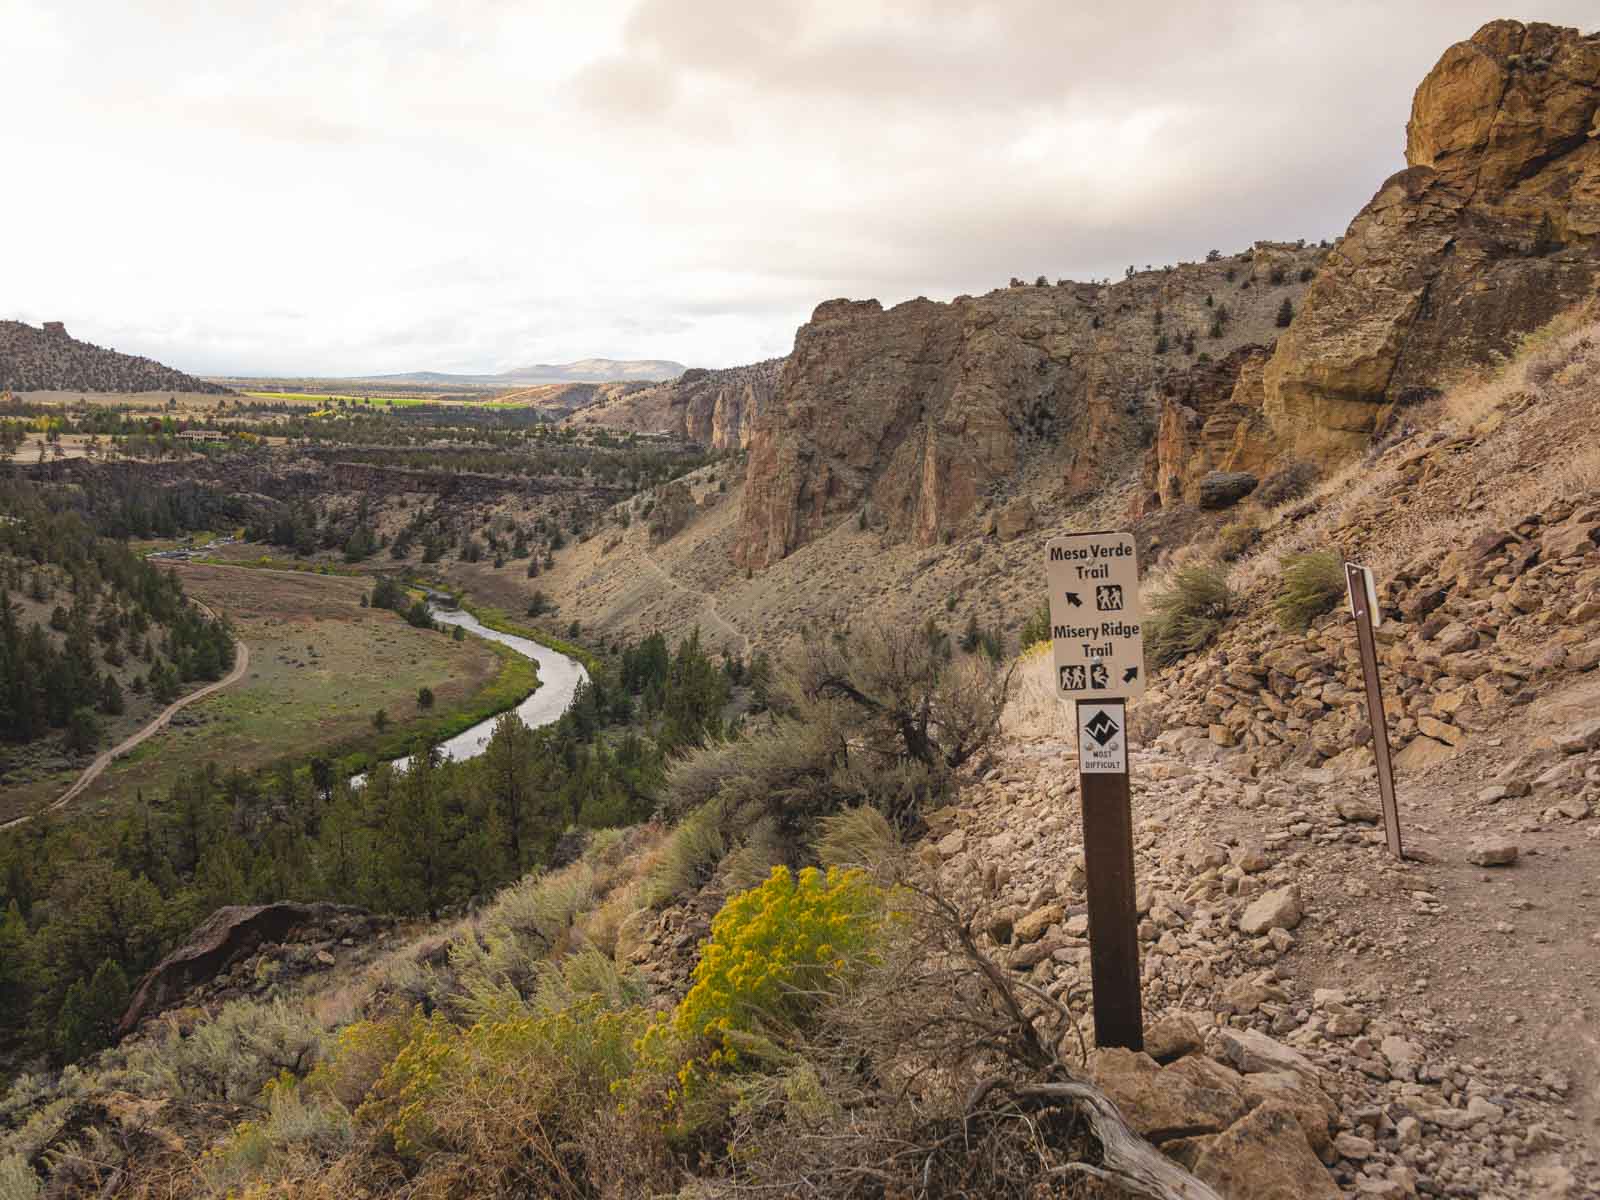 The Mesa Verde trail is a must on your Smith Rock hike.